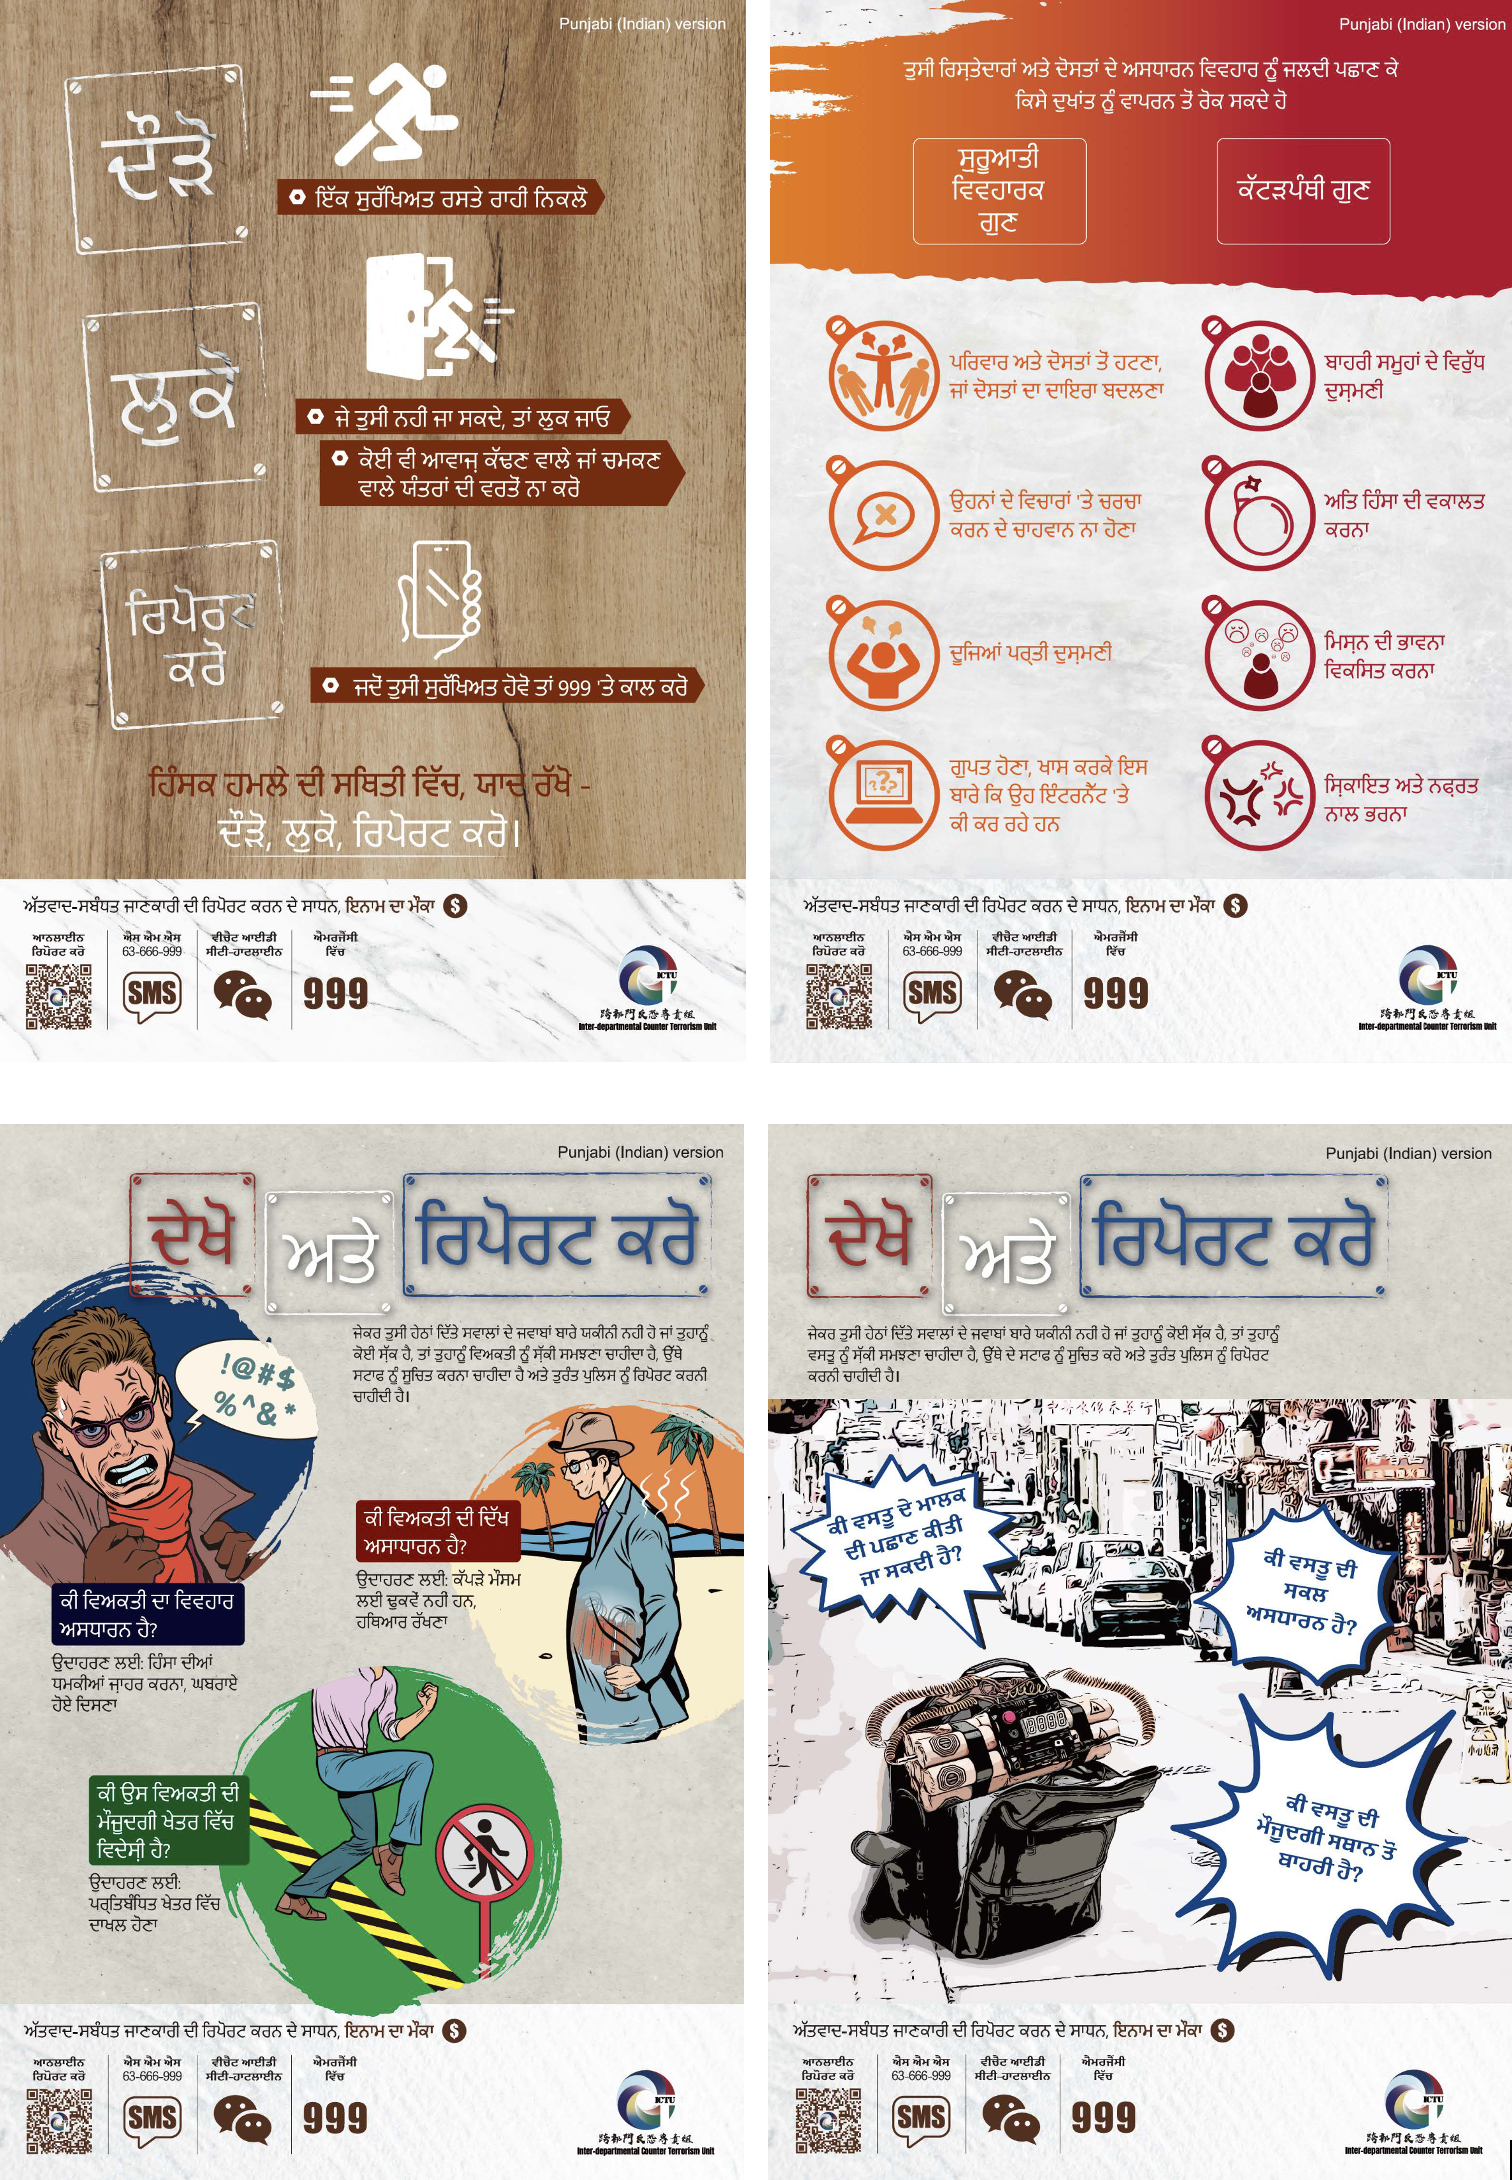 ‘Run, Hide, Report’, ‘Spot and Report – suspicious person’, ‘Spot and Report – suspicious objects’ and ‘Guidelines for identifying Extremist Thoughts’  – Punjabi (Indian) version